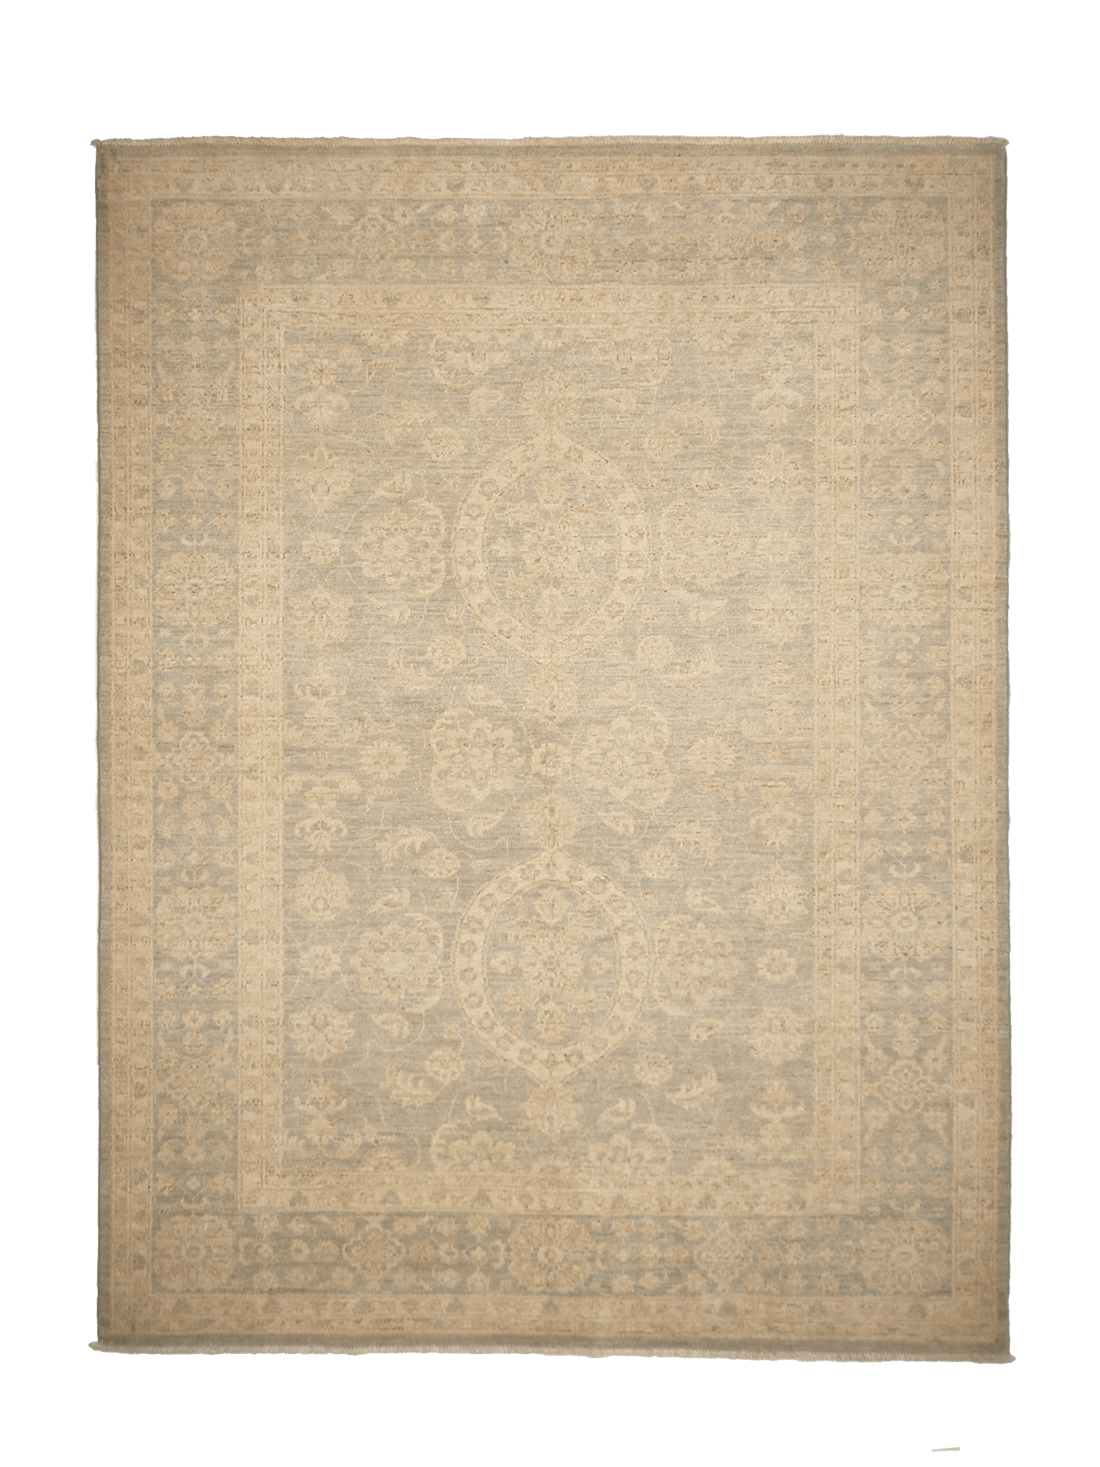 Authentic persian rug with delicate floral pattern in beige